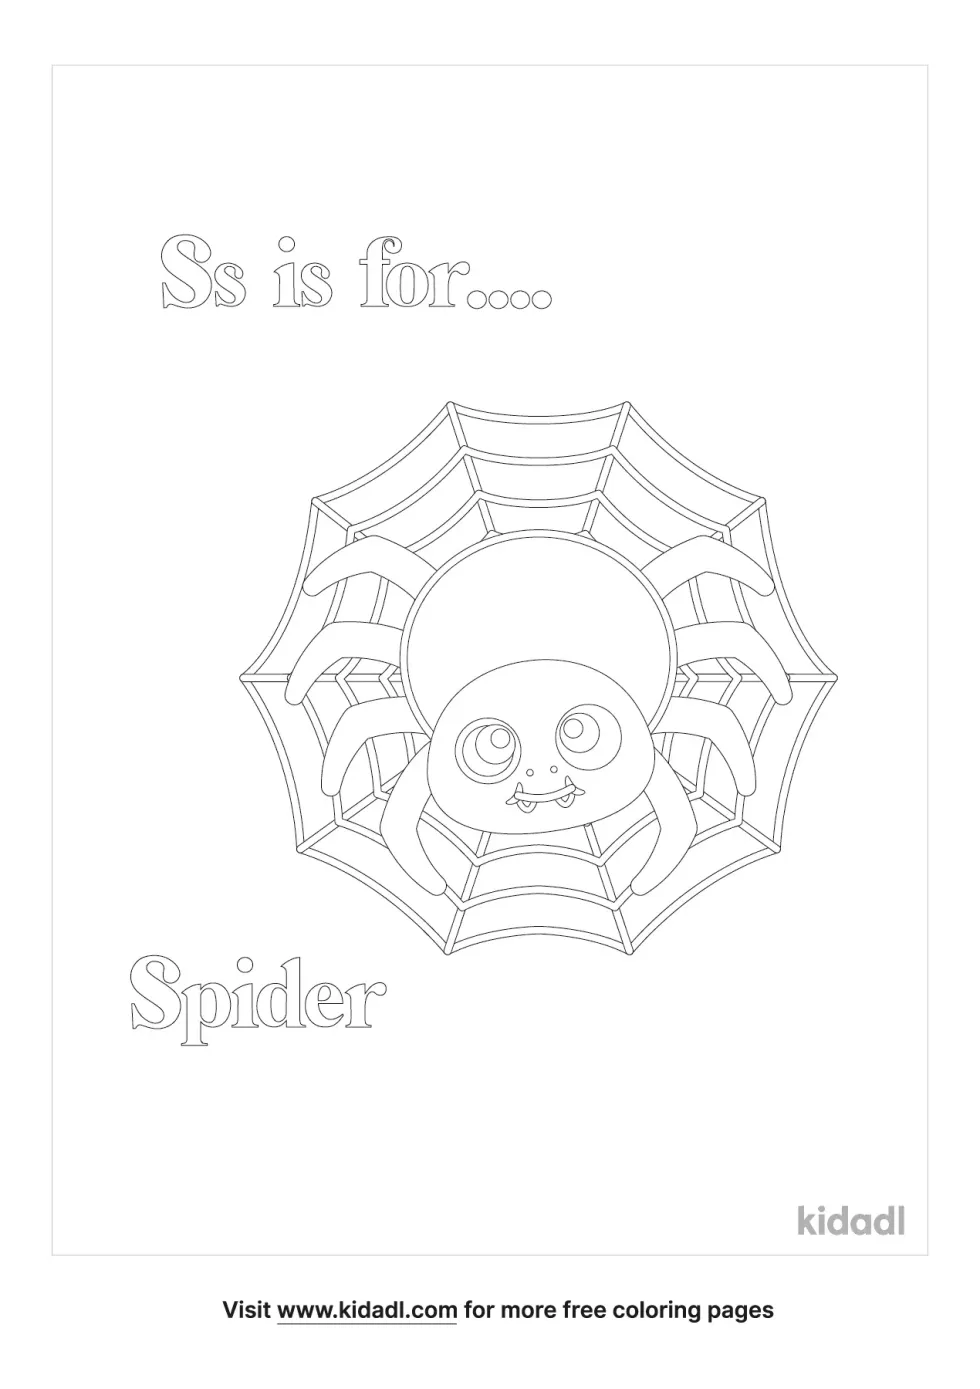 S Is For Spider